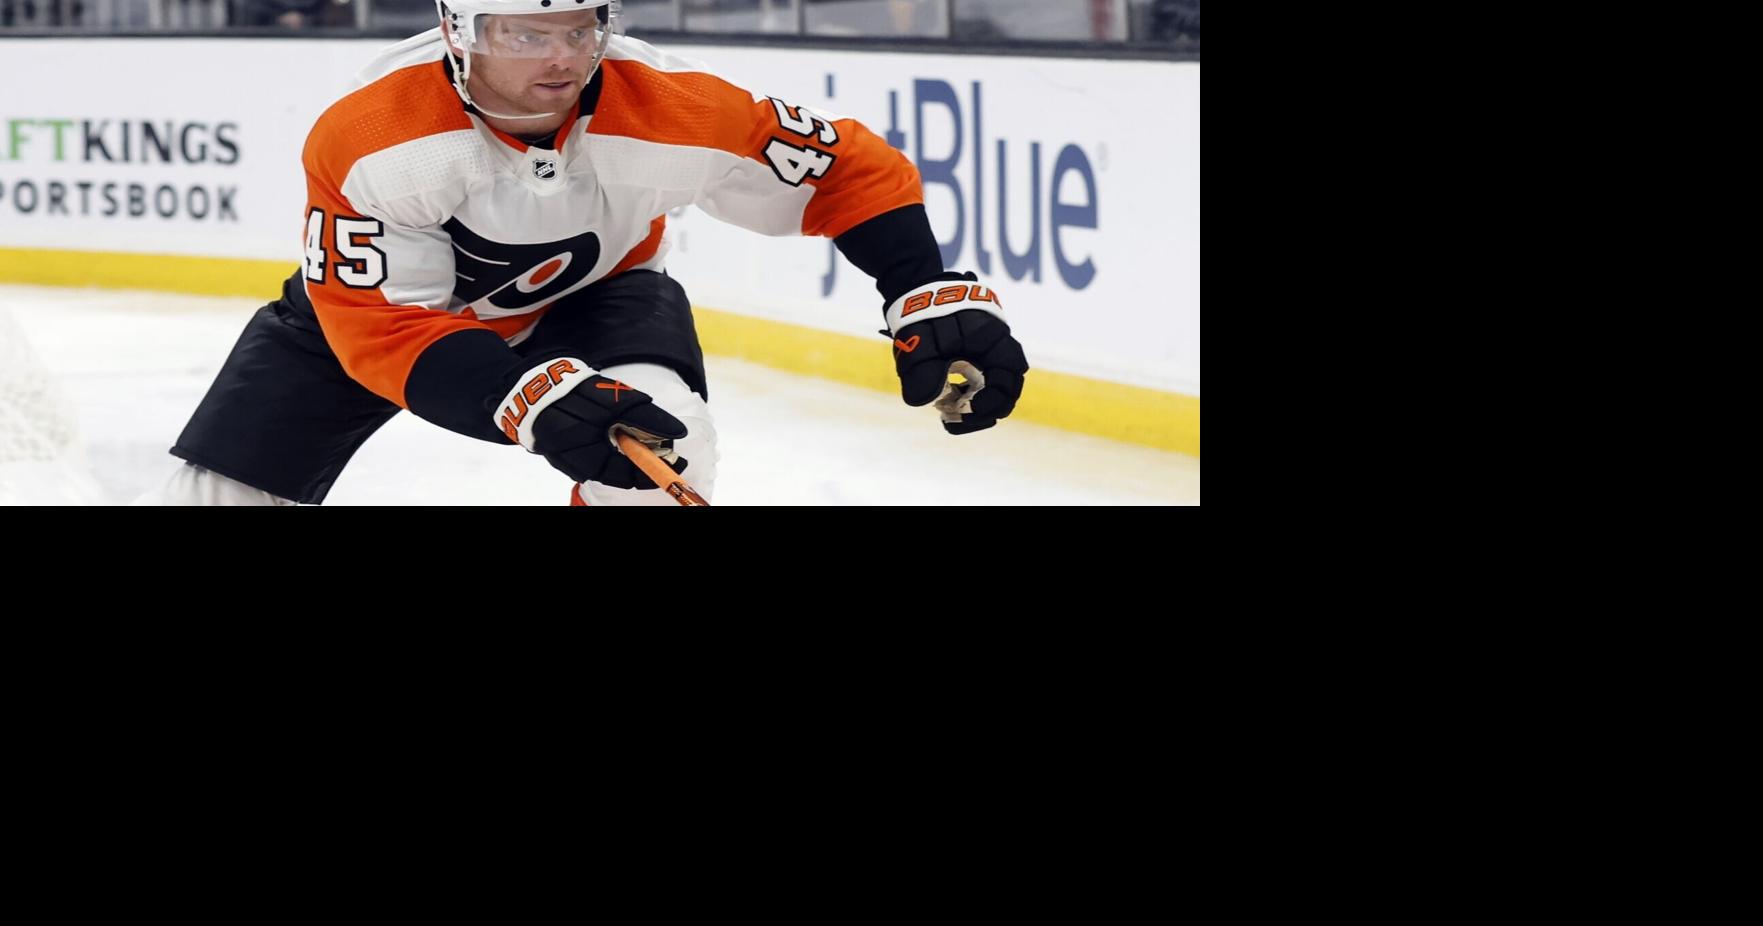 2022-23 Flyers Player Profile: Other Defensive Options